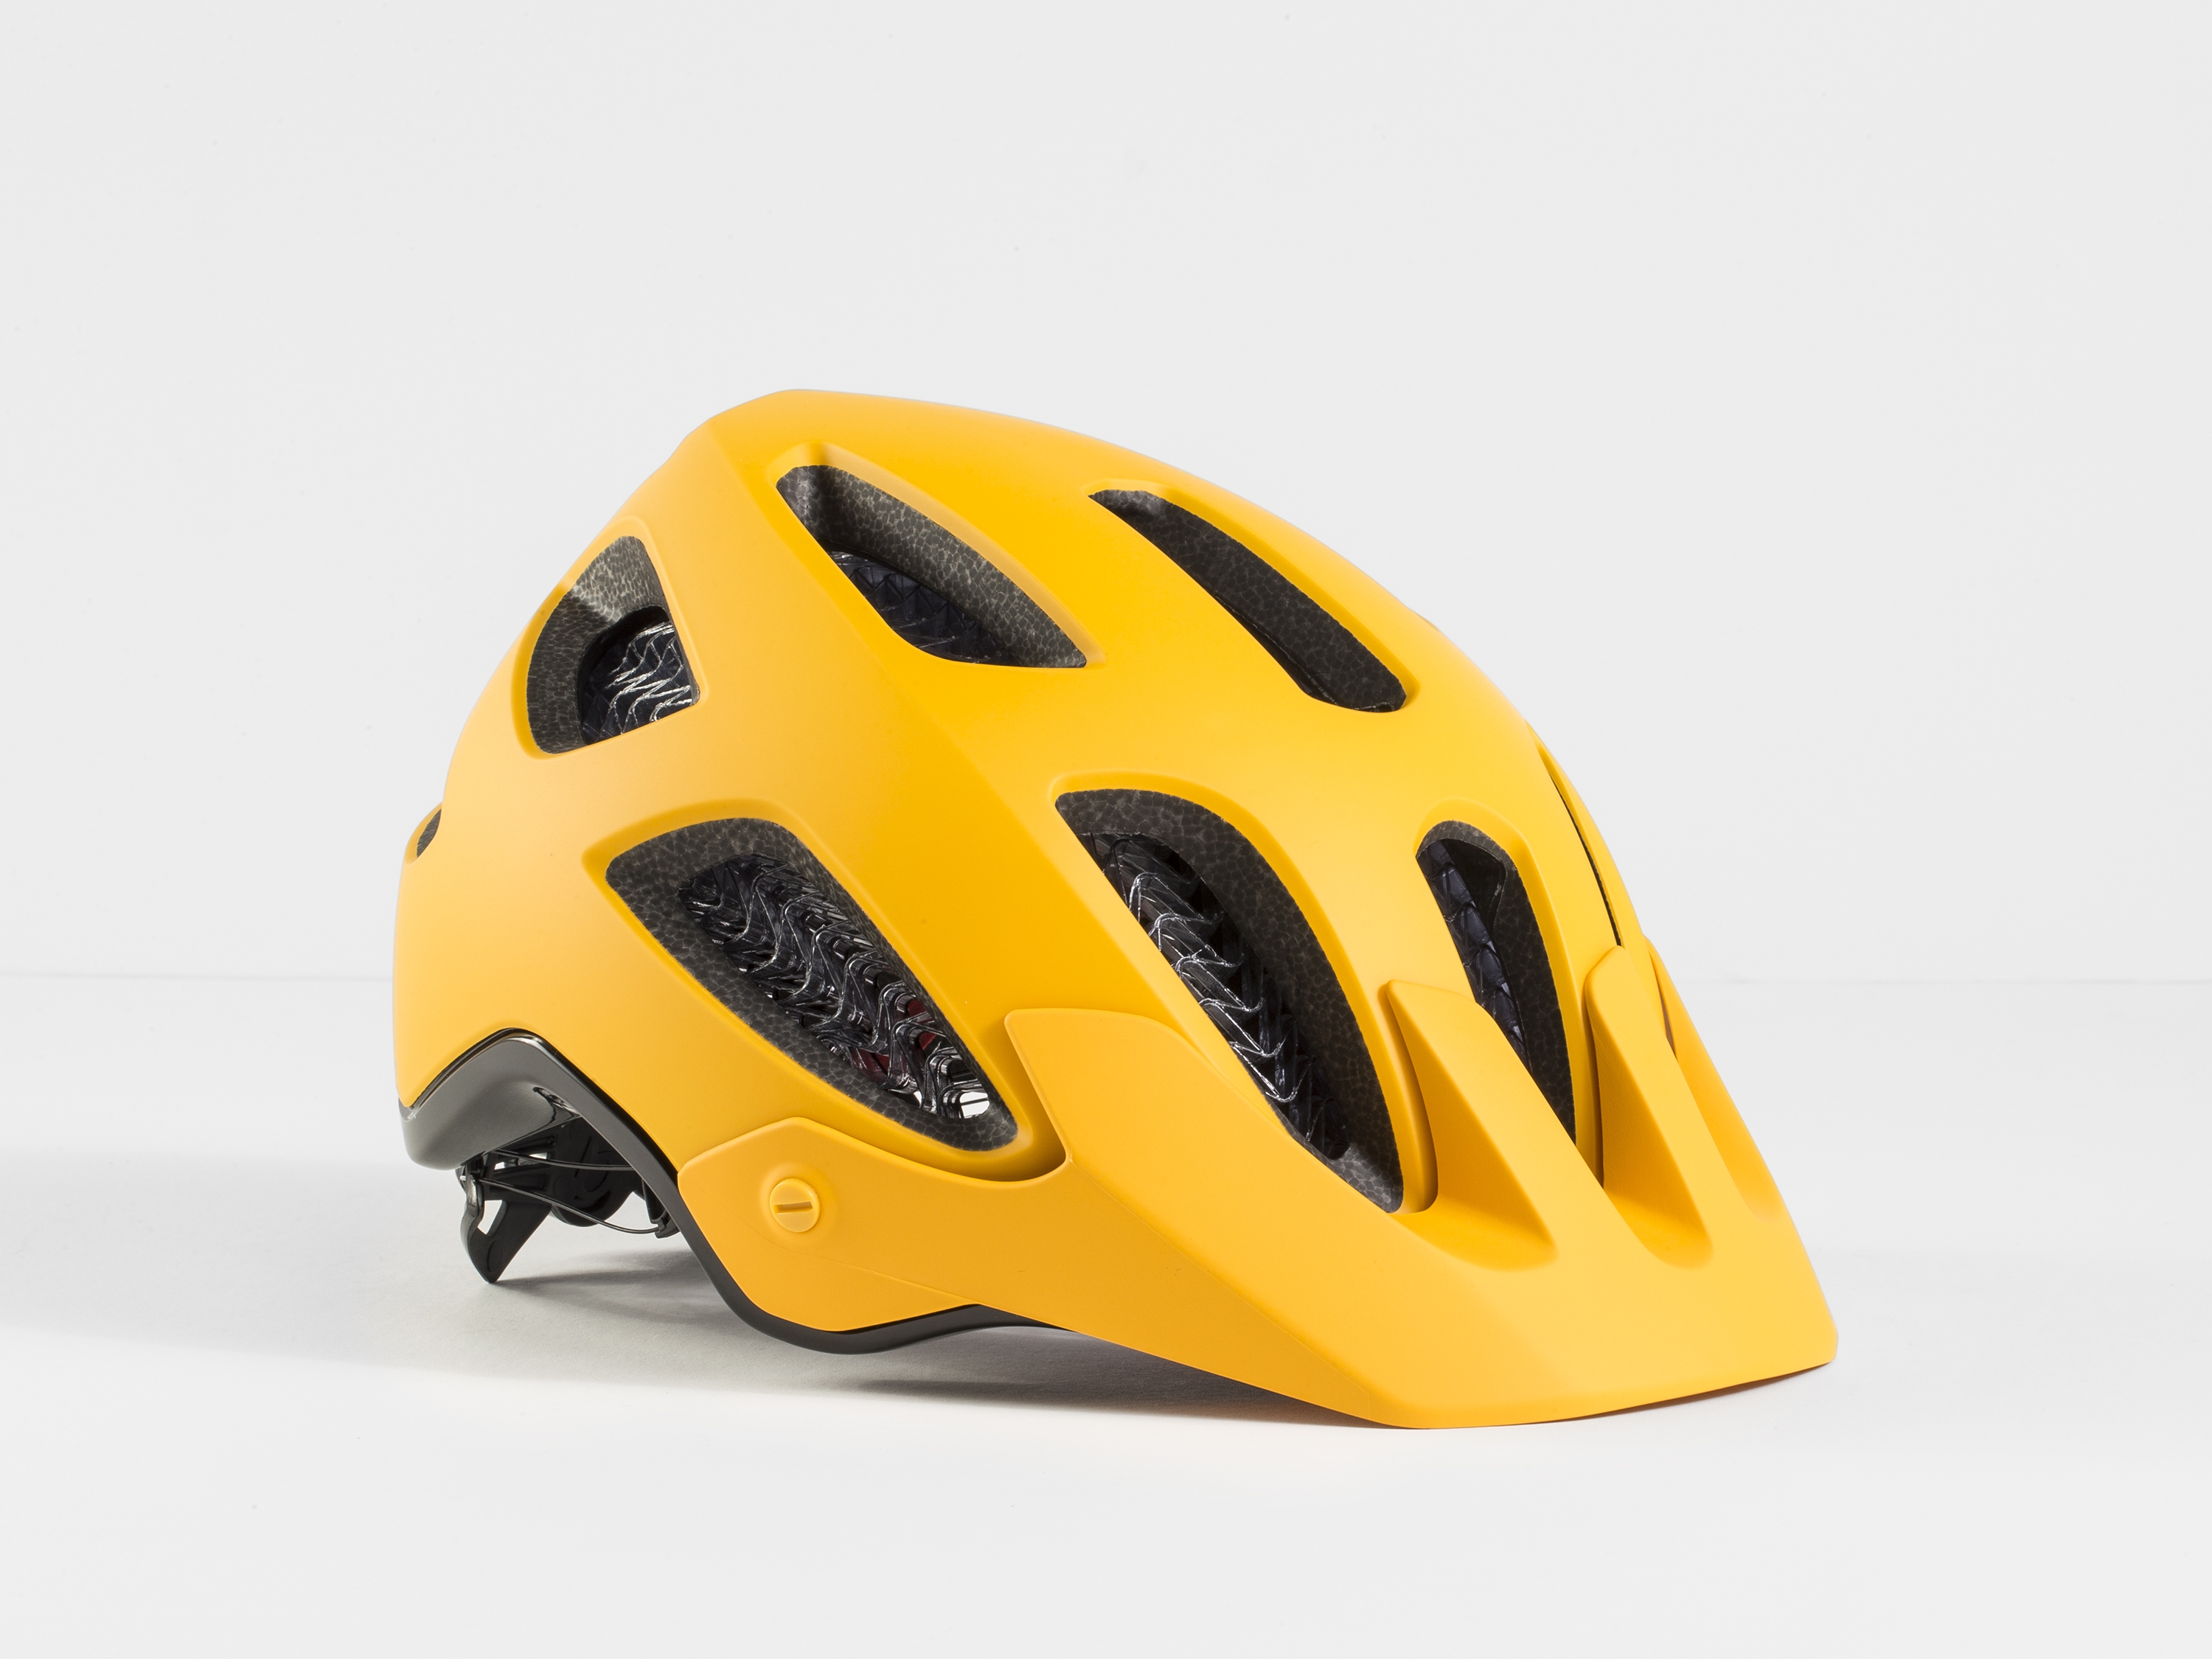 <a href="https://cycles-clement.be/product/casque-bont-rally-wavecel-small-marigold-blac/">CASQUE BONT RALLY WAVECEL SMALL MARIGOLD/BLAC</a>